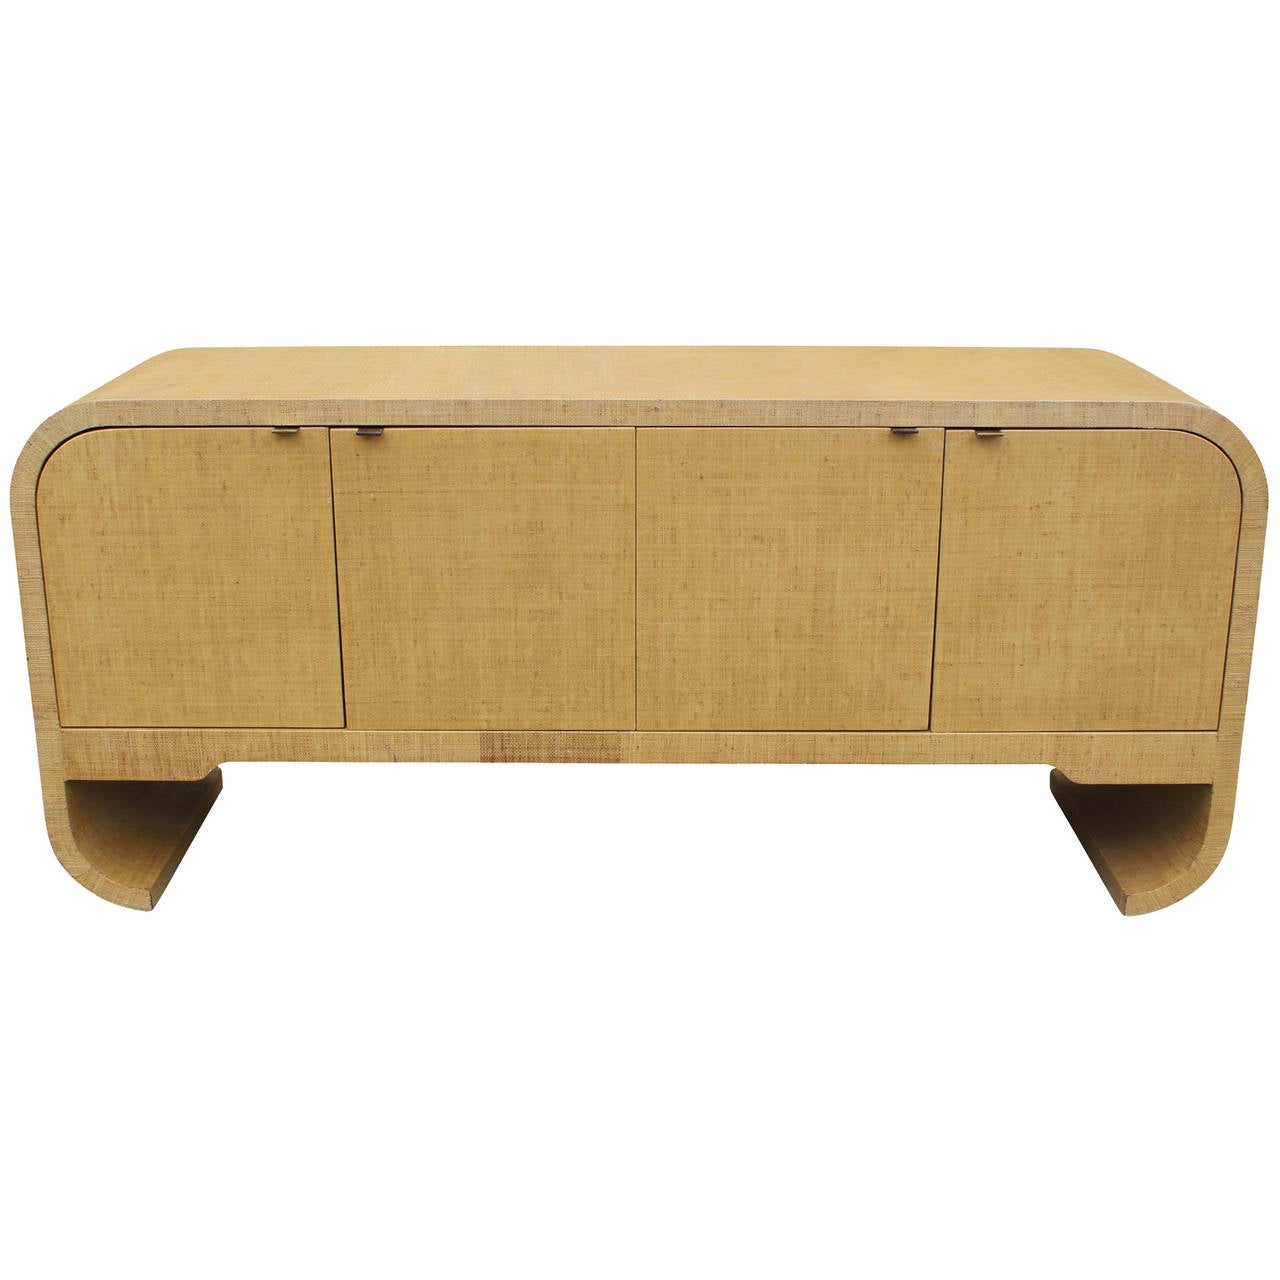 Fabulous sideboard in the style of Karl Springer. Sideboard is covered in a warm neutral seagrass or raffia topped with clear coat. Four doors are accented with minimalist brass pulls. Curved edges and dramatic scrolled legs make a statement. The